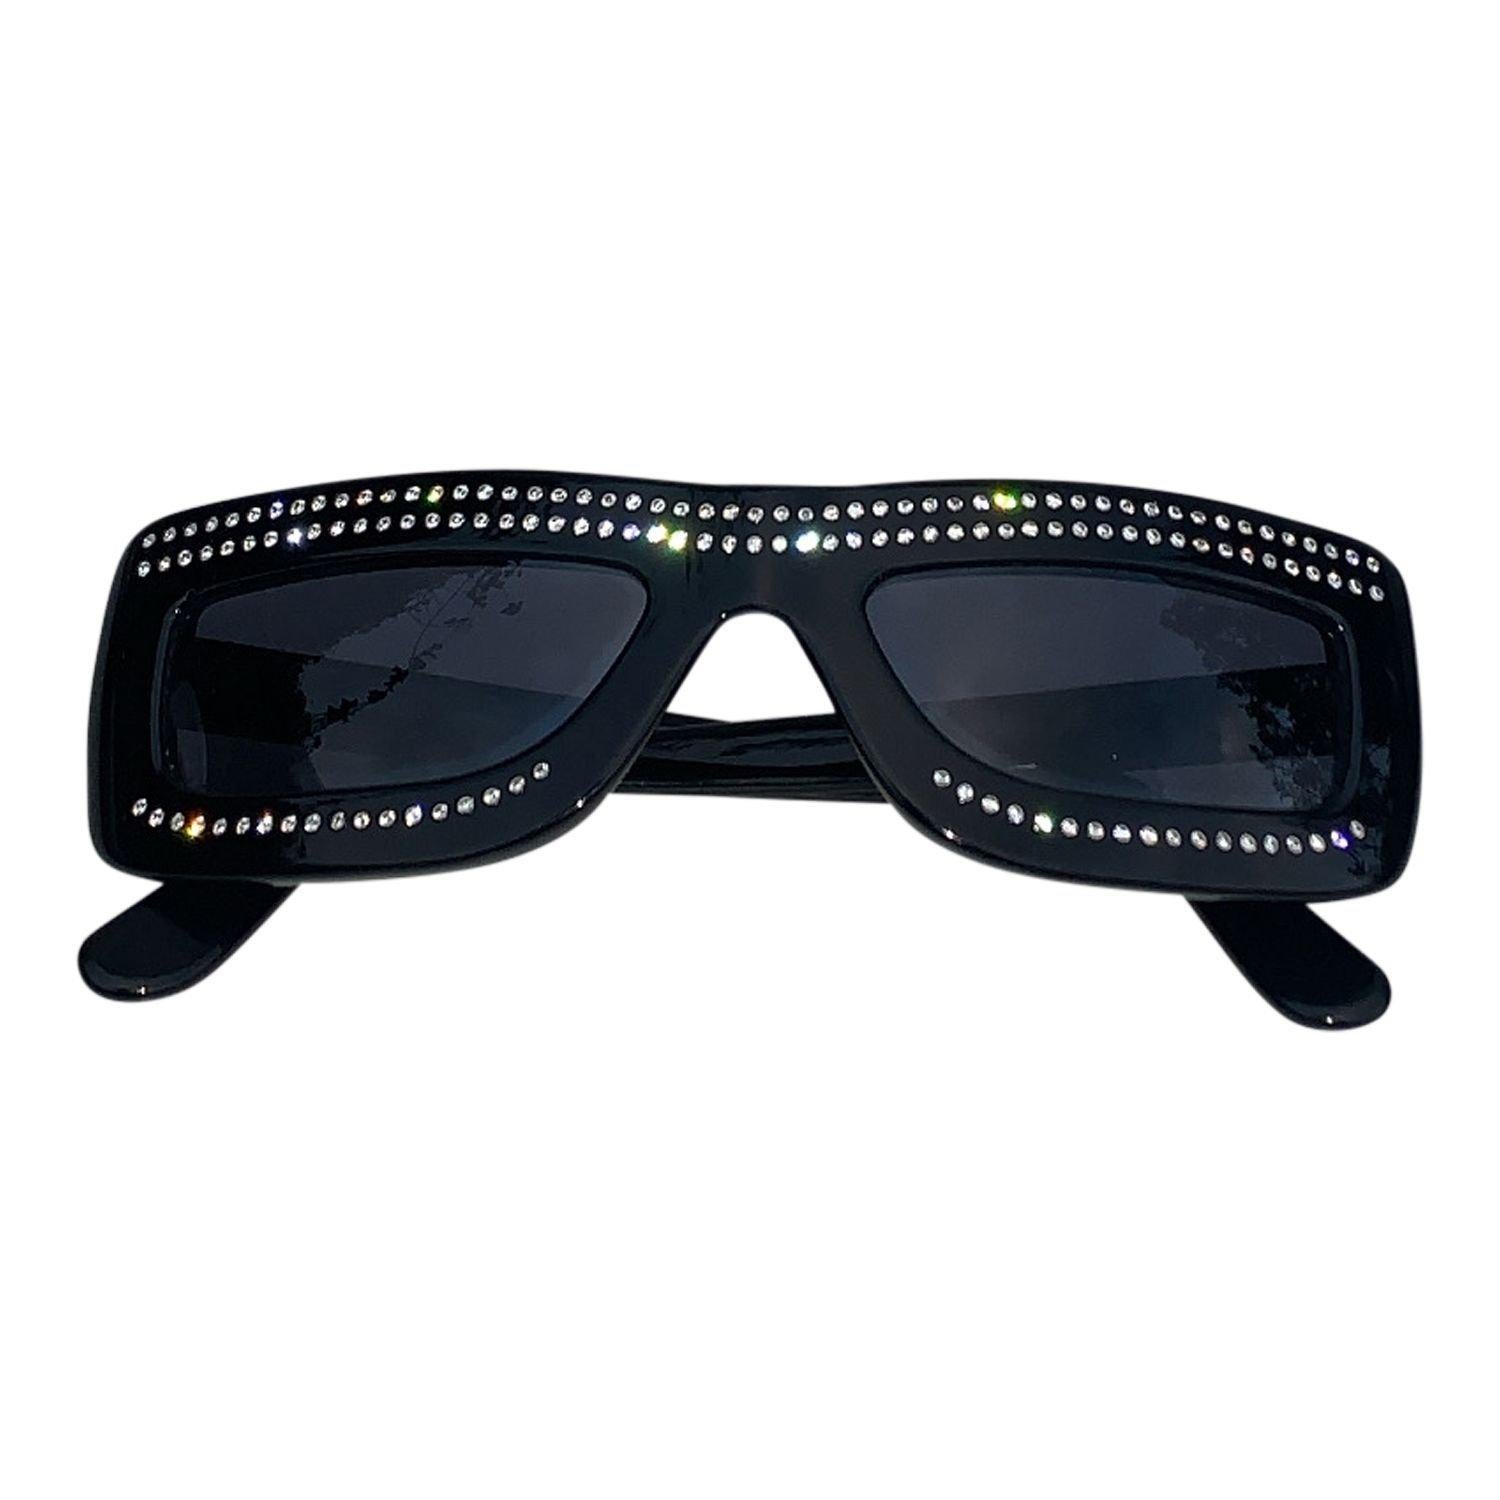 These Moschino sunglasses are a true fashion statement.
The black frames are made of high-quality acetate and feature a classic rectangular shape. The arms are adorned with a cut-out design that adds a touch of edginess to the overall look. The